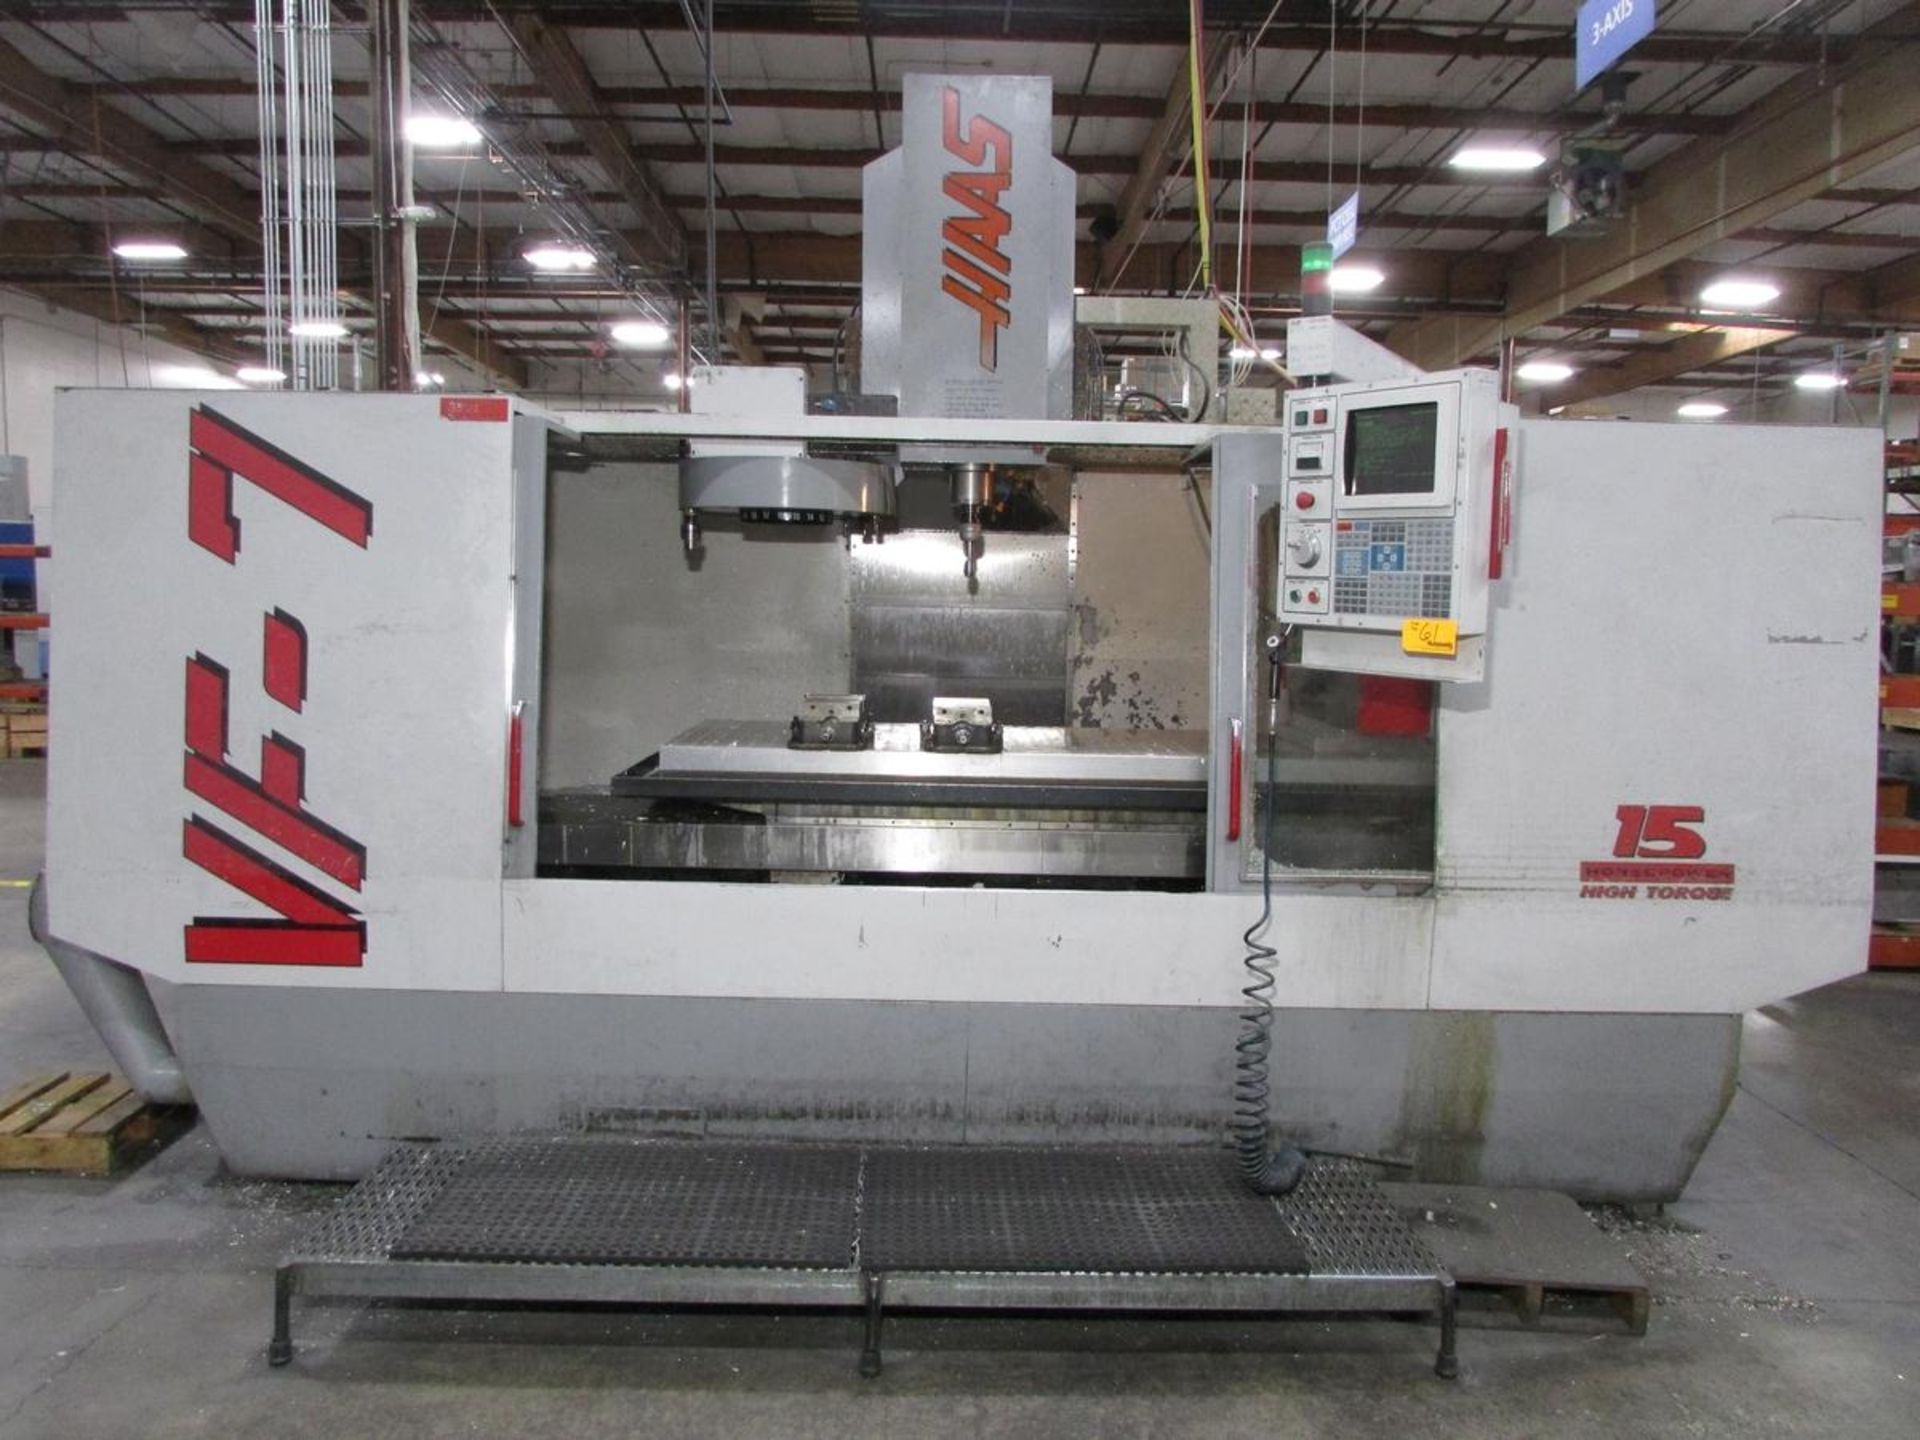 1997 Haas VF-7 4-Axis CNC Vertical Maching Center - Image 2 of 30